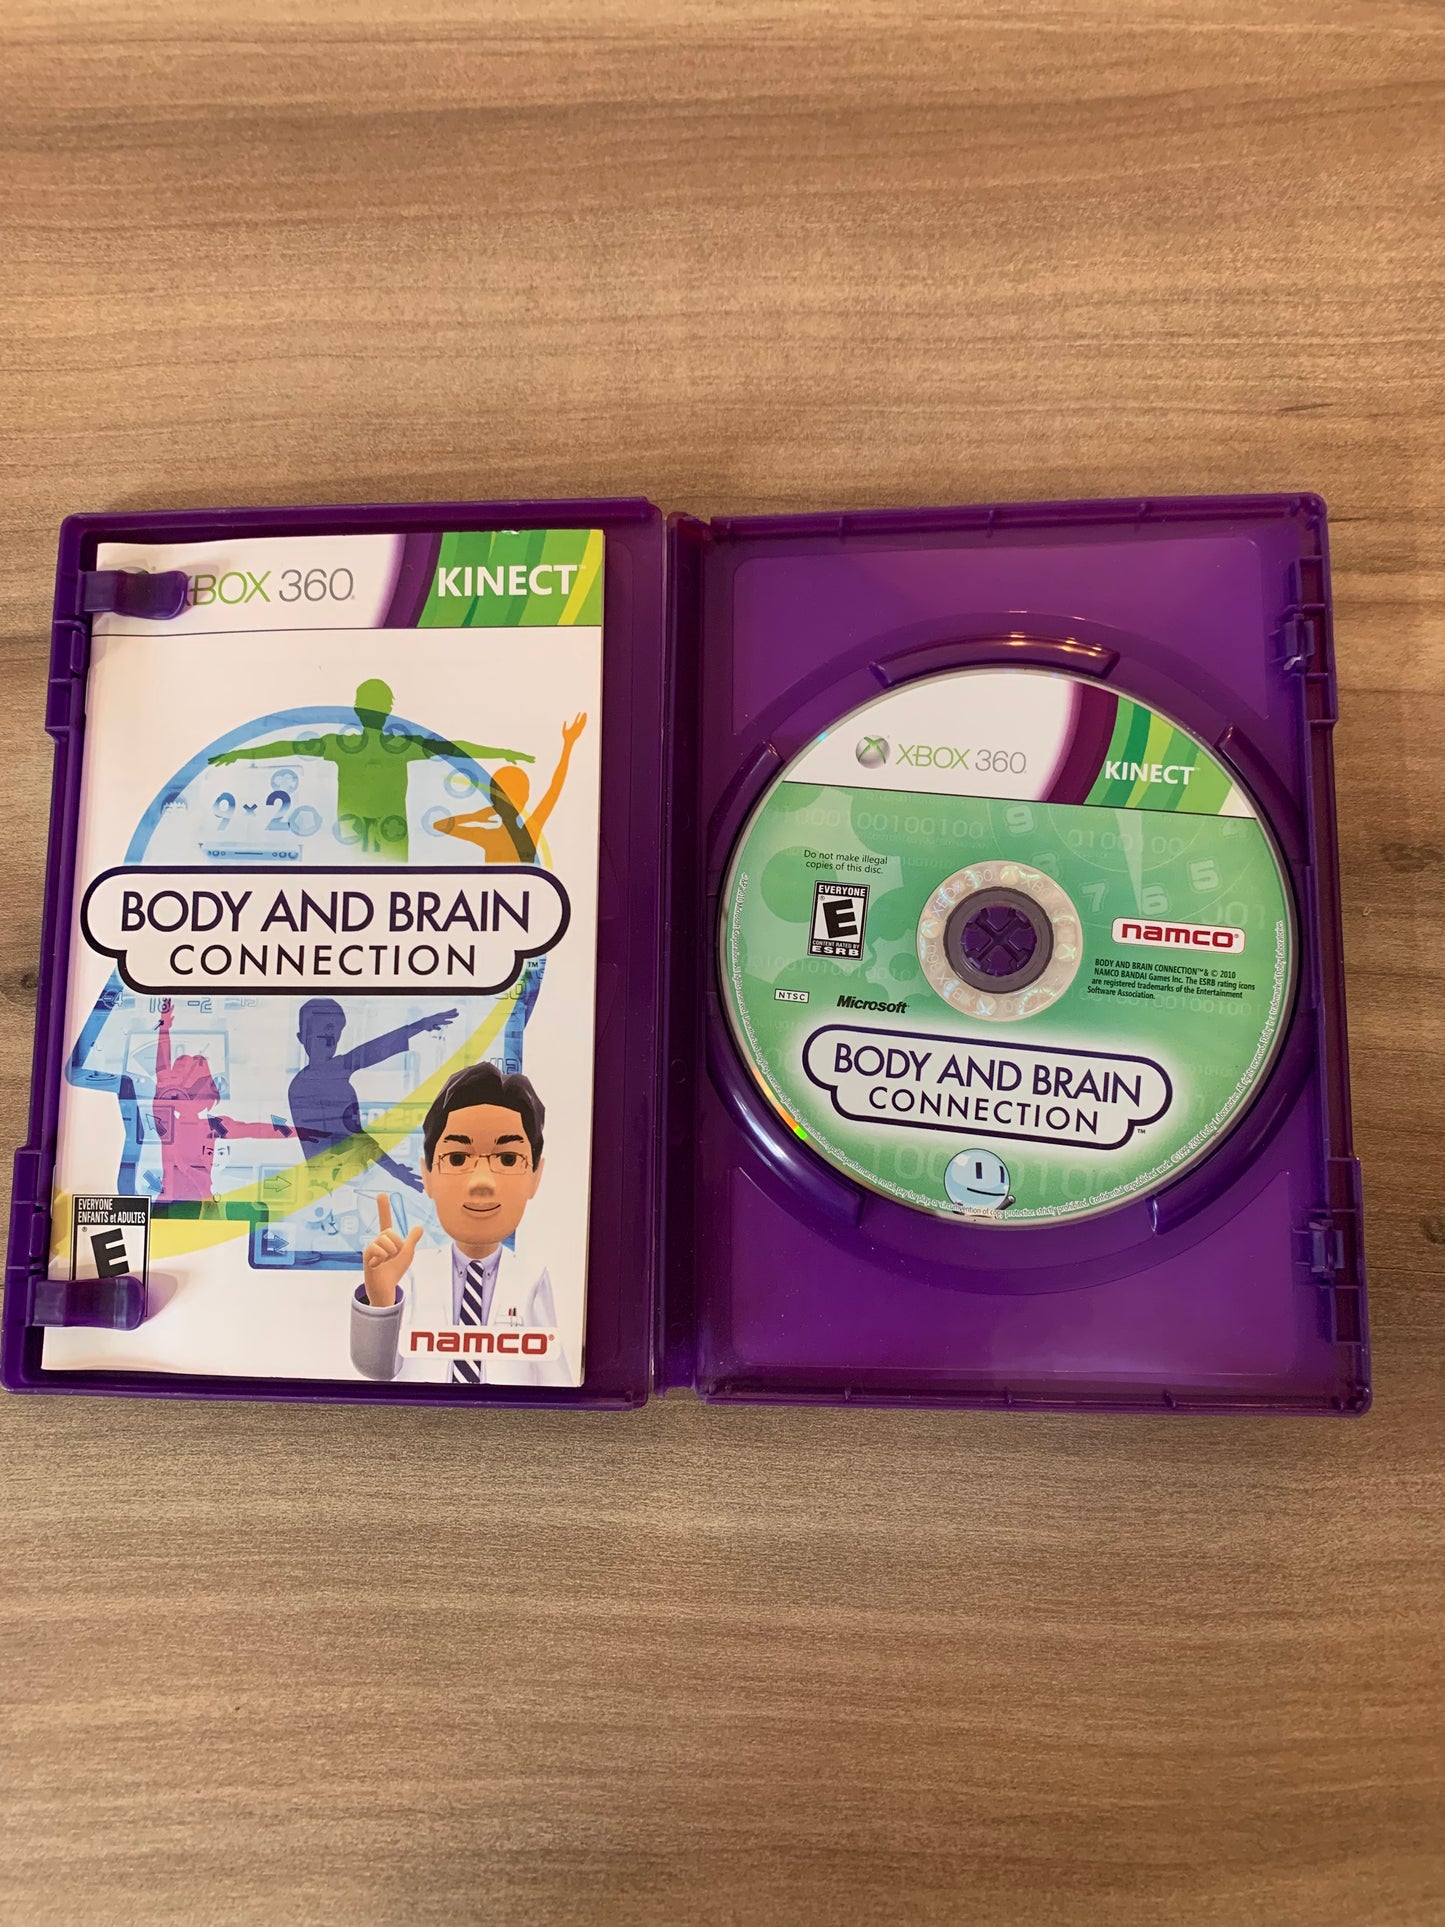 MiCROSOFT XBOX 360 | BODY AND BRAiN CONNECTiON